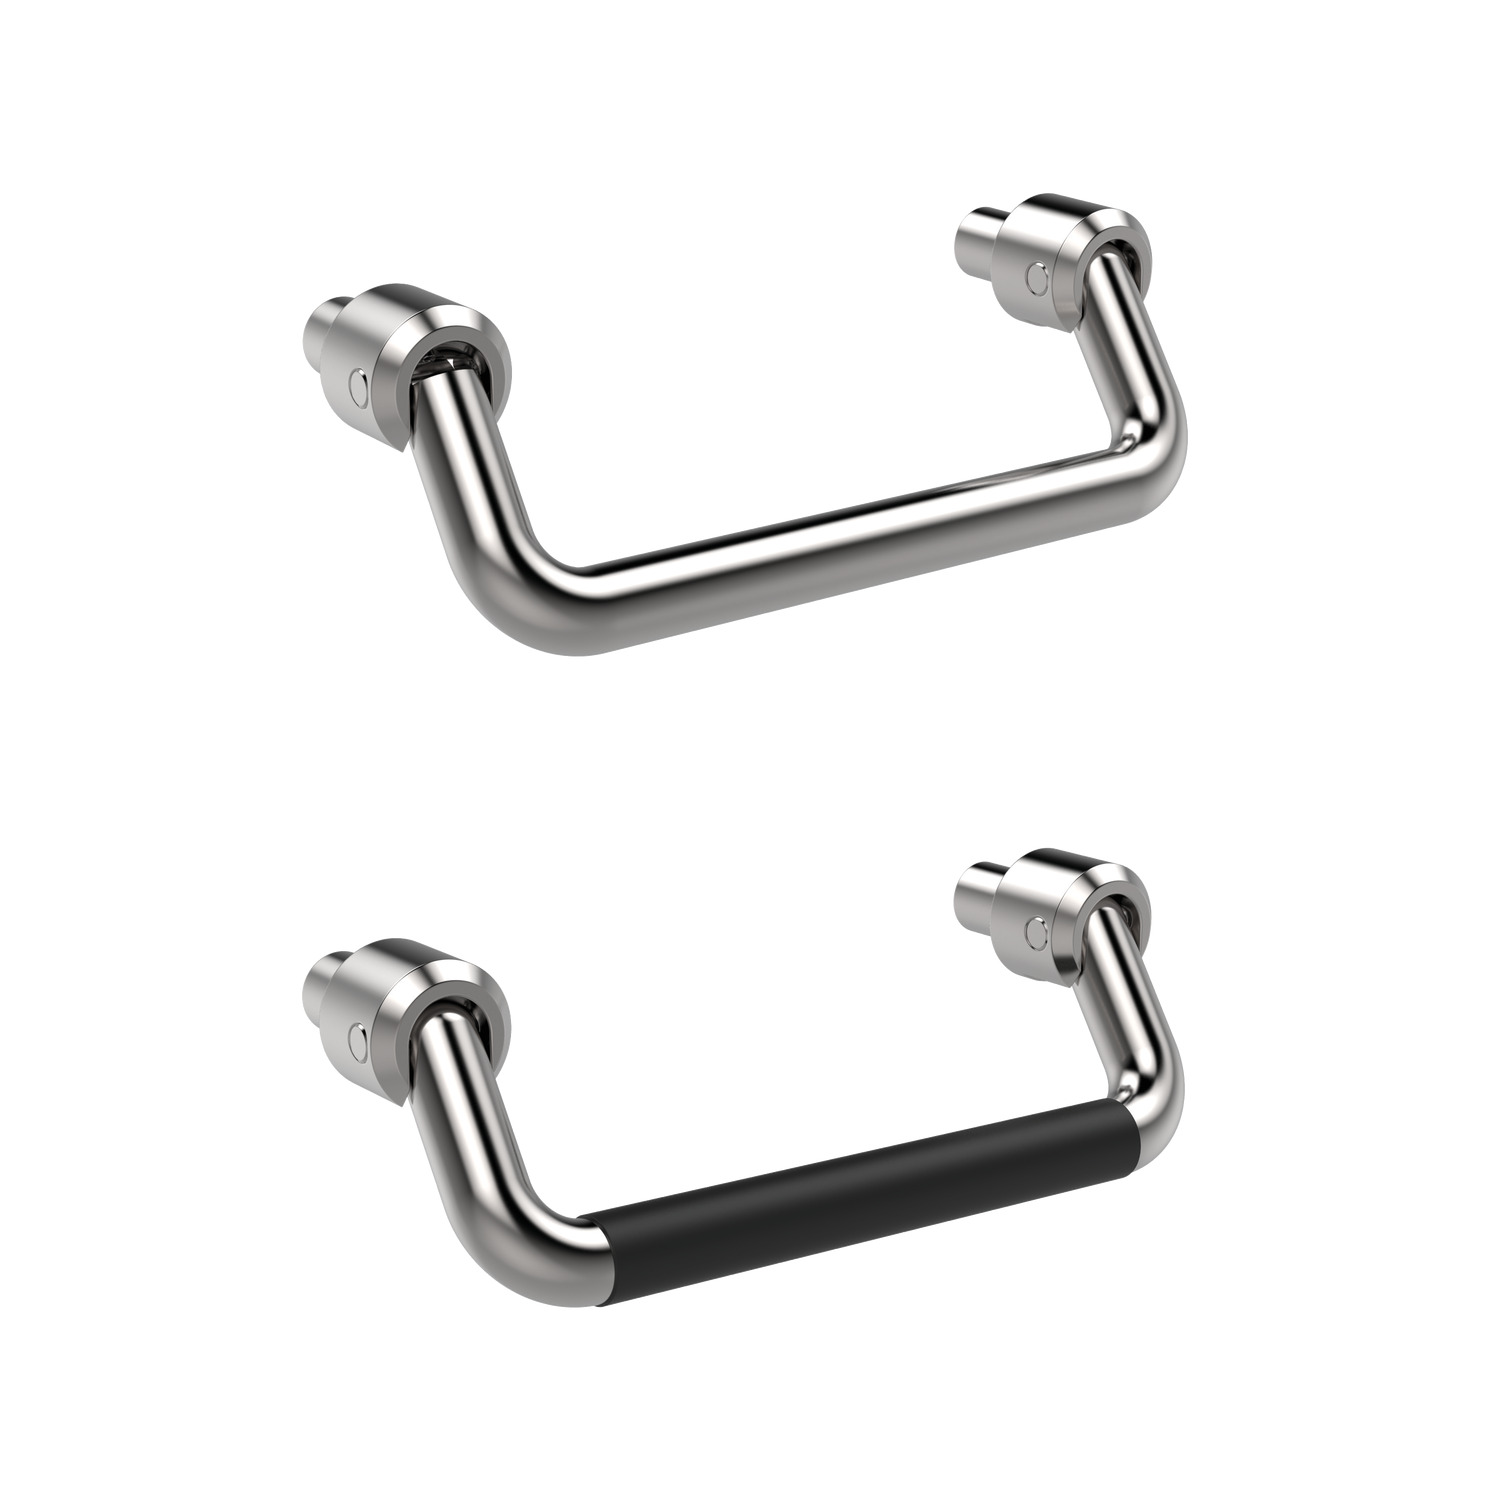 79570.W0100 Pull Handles - Collapsible Without plastic grip - 100. Also known as U5600.AC0100